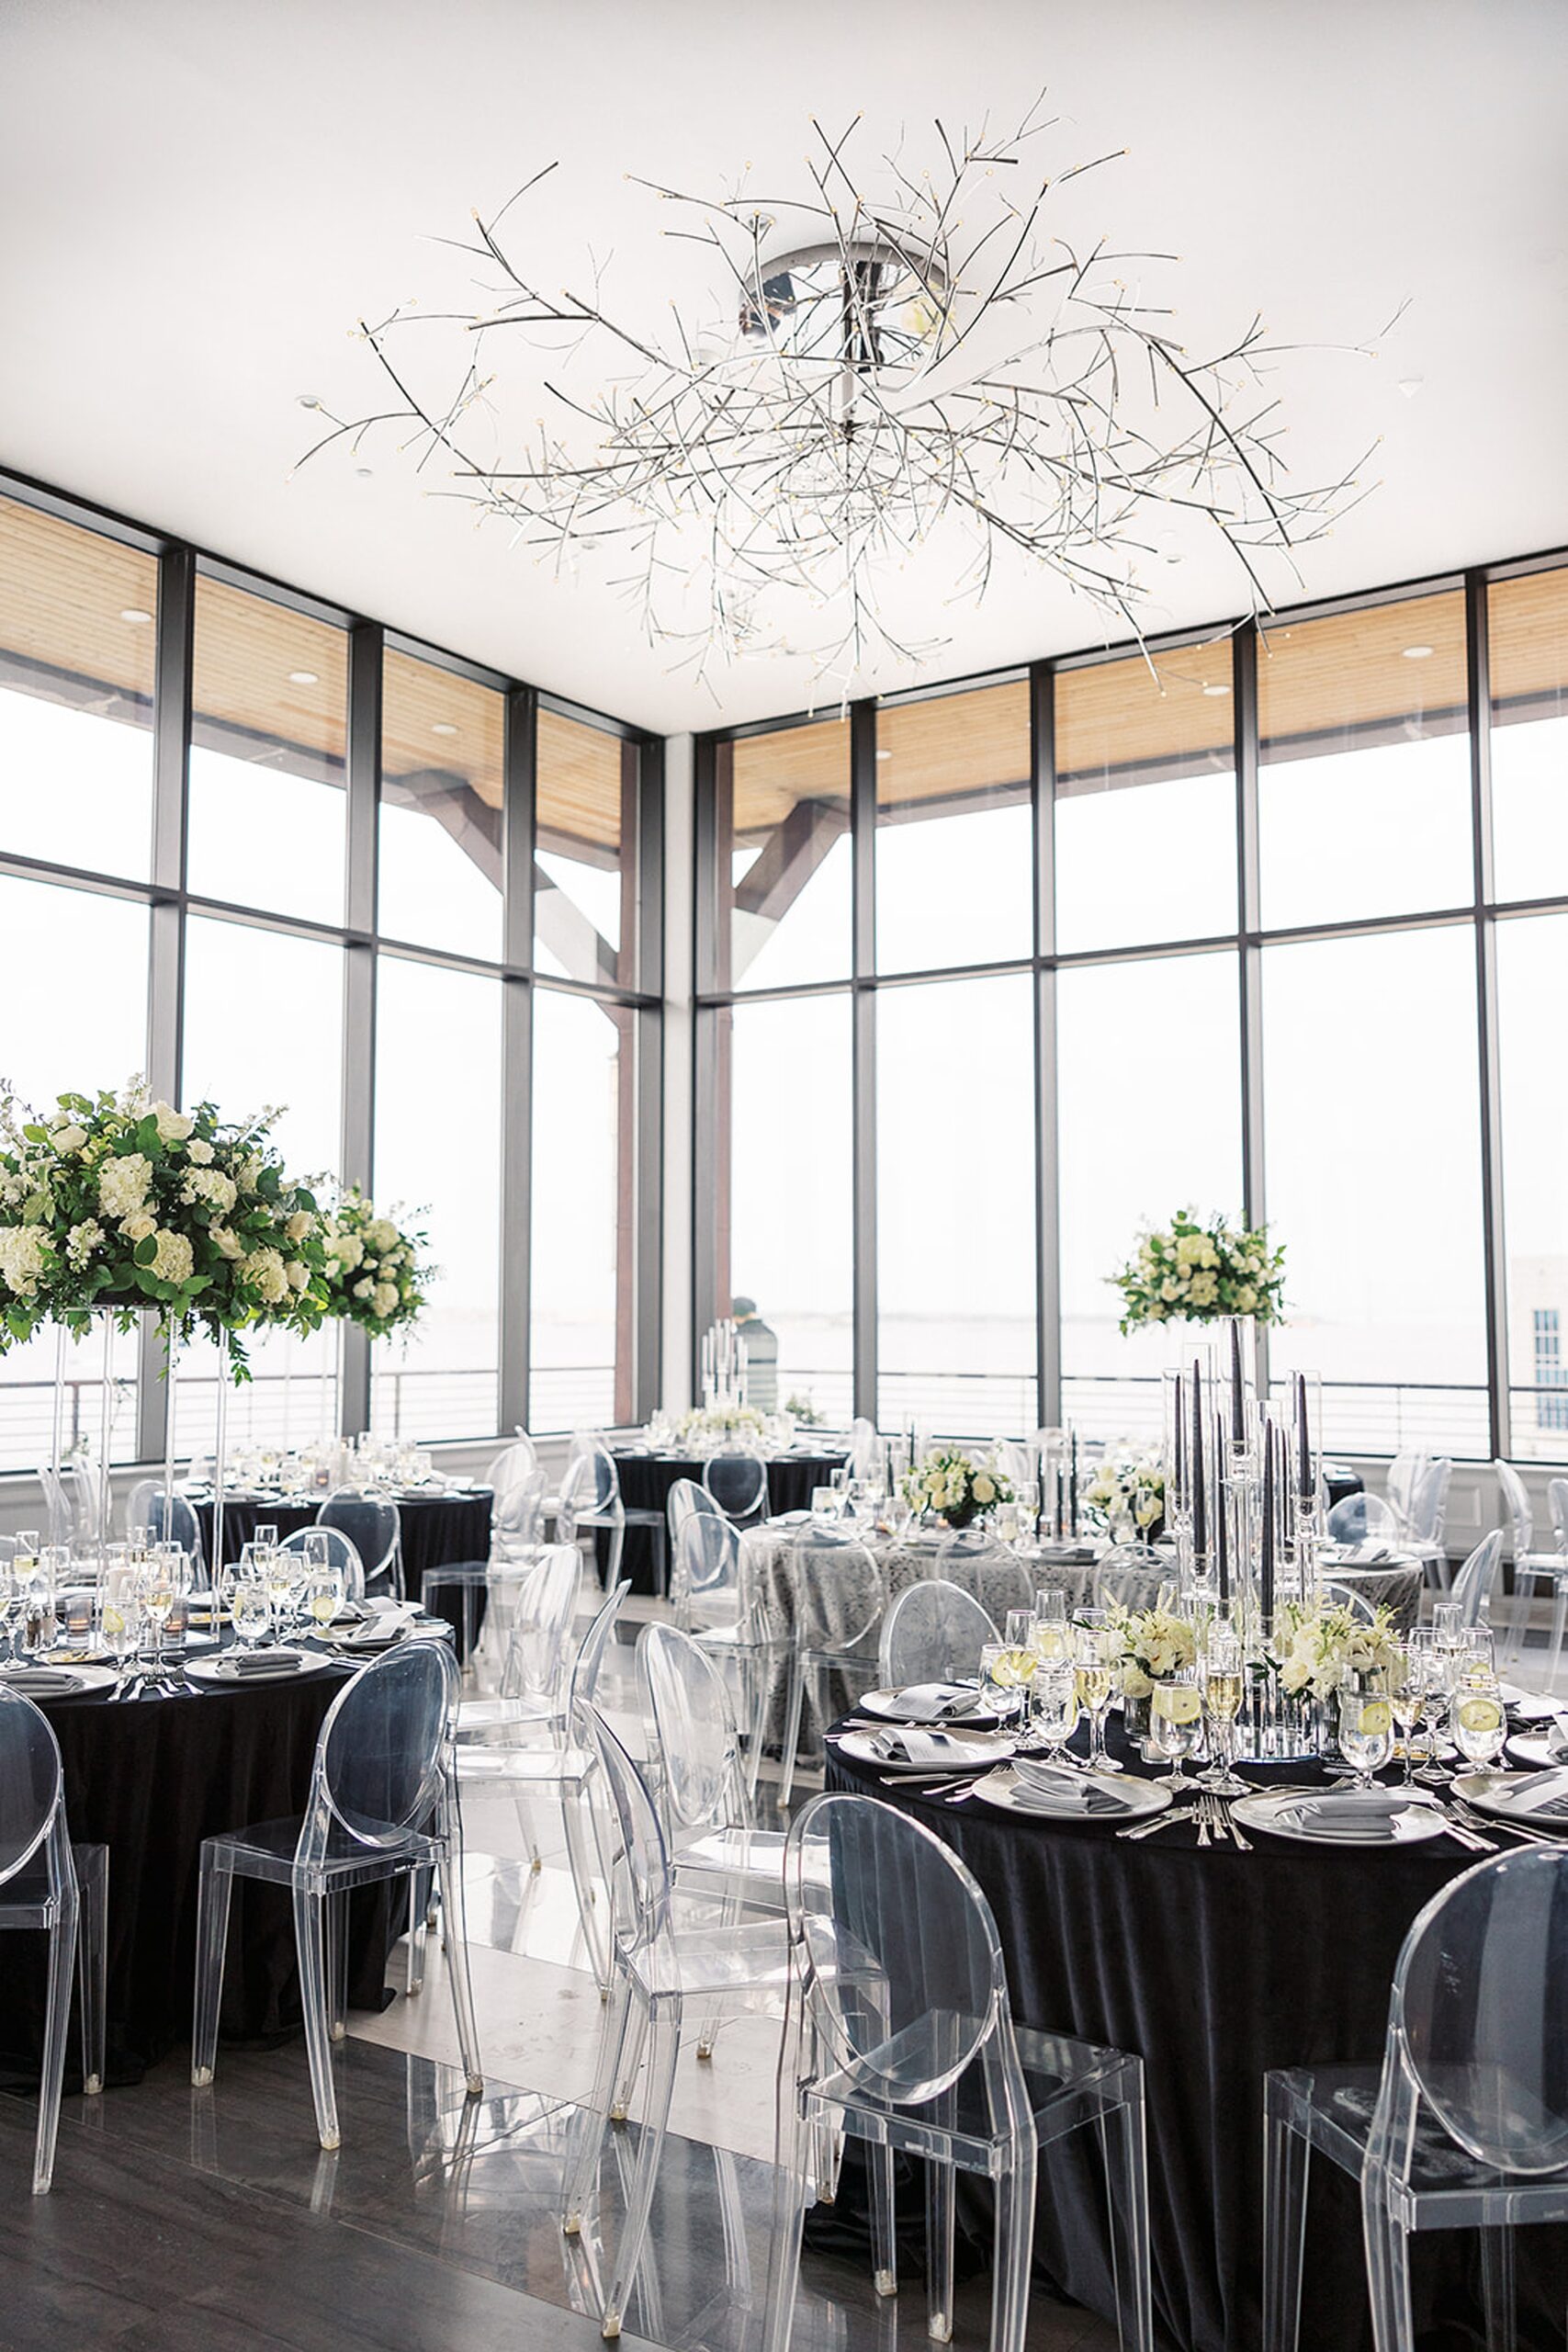 Details of a wedding reception venue with black linens and clear plastic chairs beneath a modern chandelier